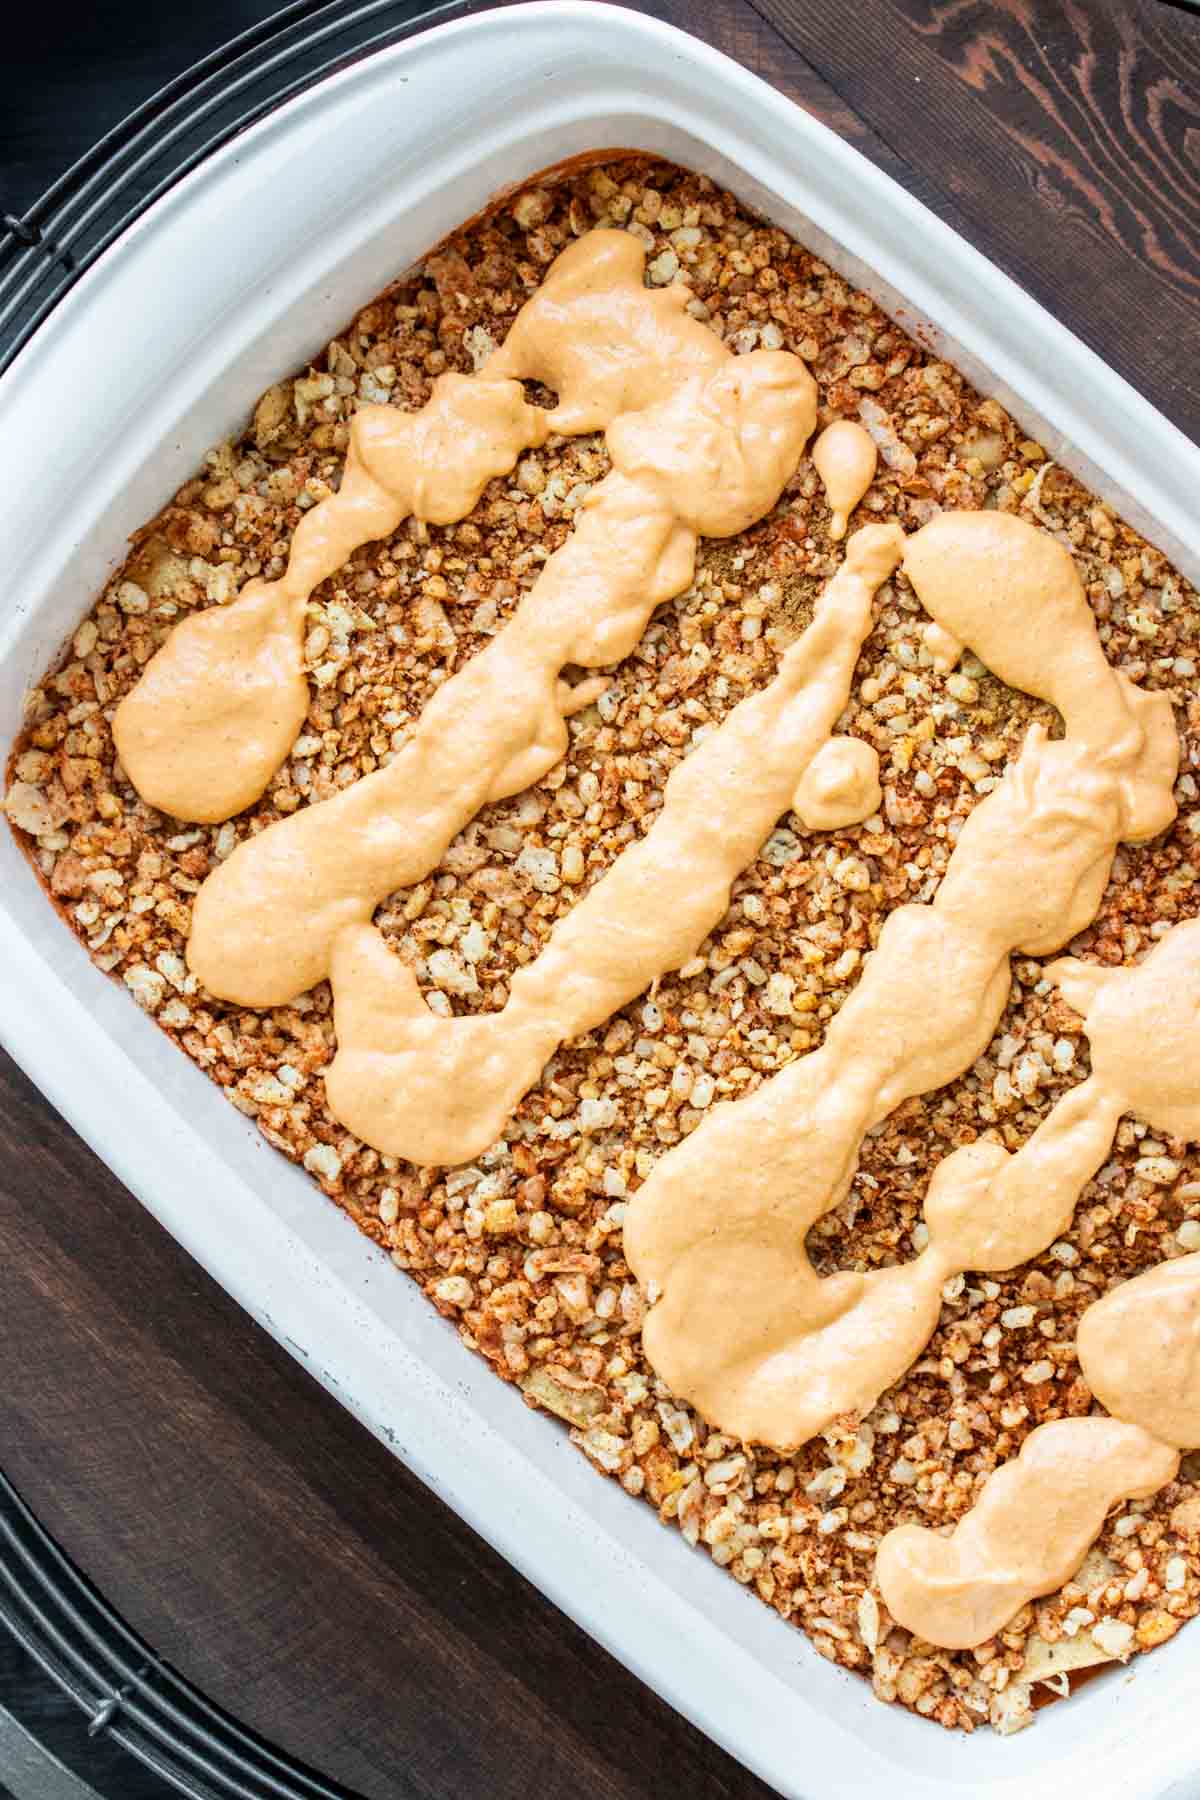 A baking dish with a meaty crumble topped with lines of a cheesy sauce in a white baking dish.